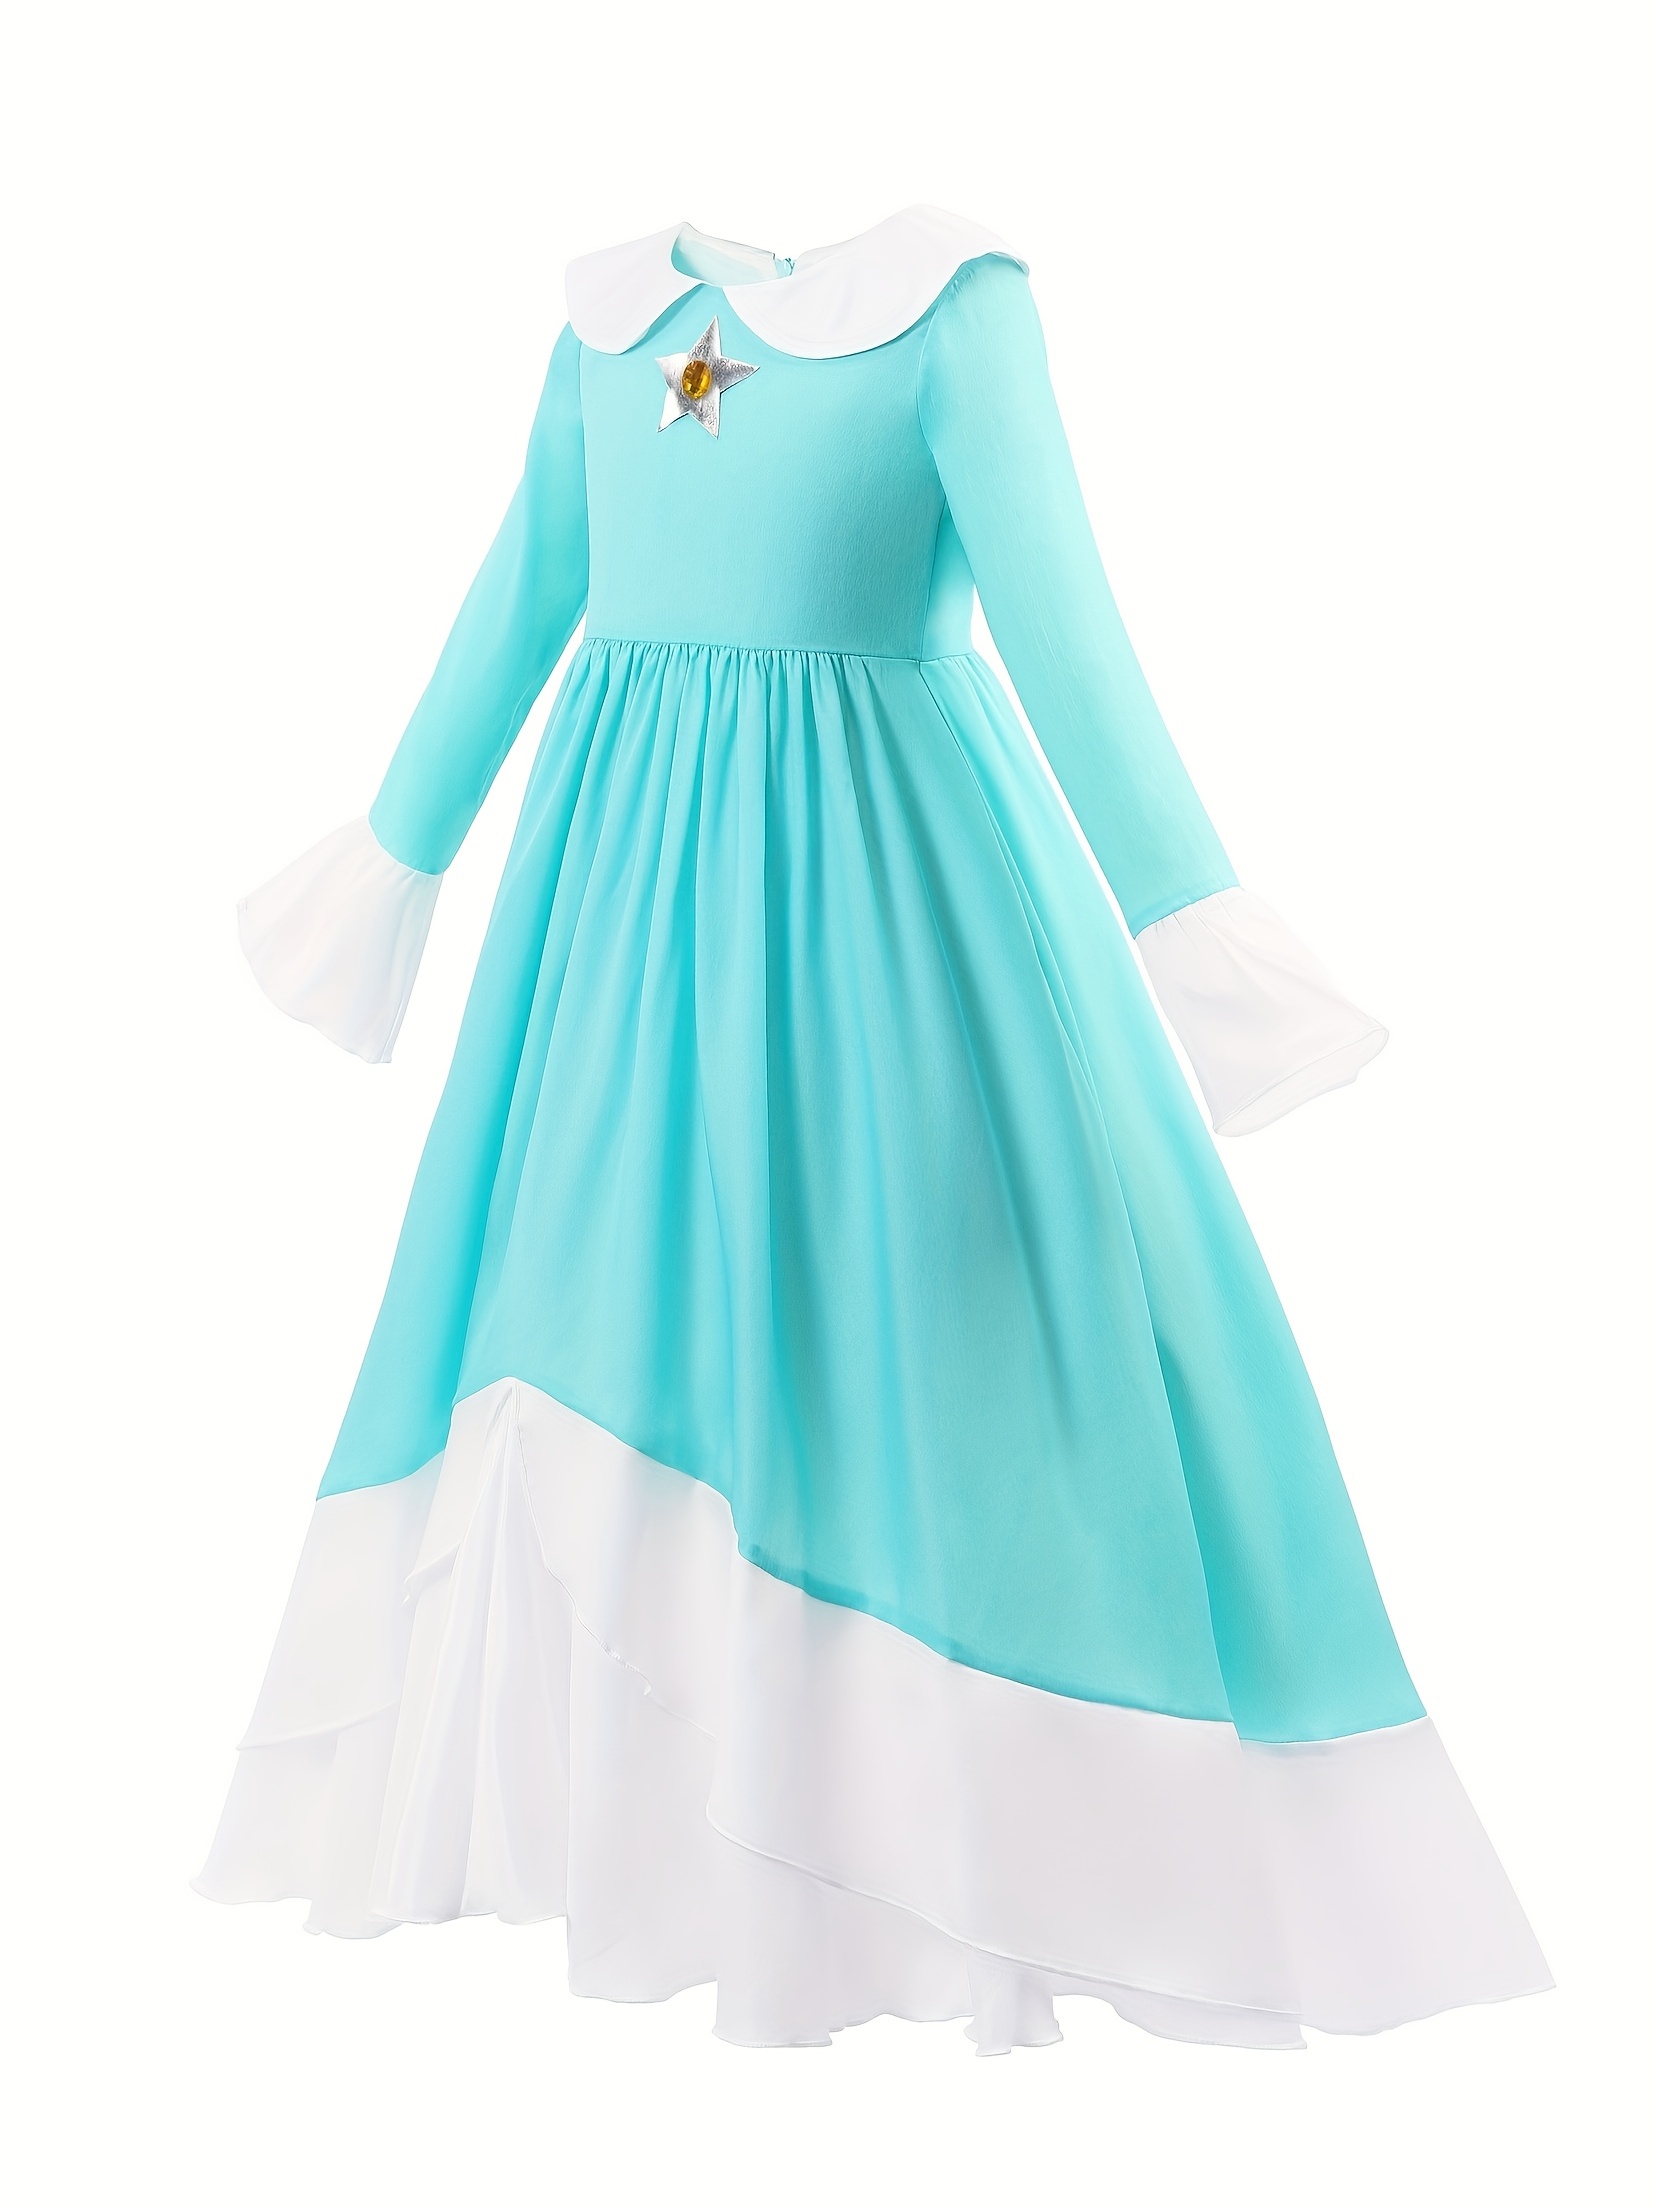  Womon Halloween Cosplay Frozen Elsa Princess Costume Stage  Costume blue/2XL : Clothing, Shoes & Jewelry